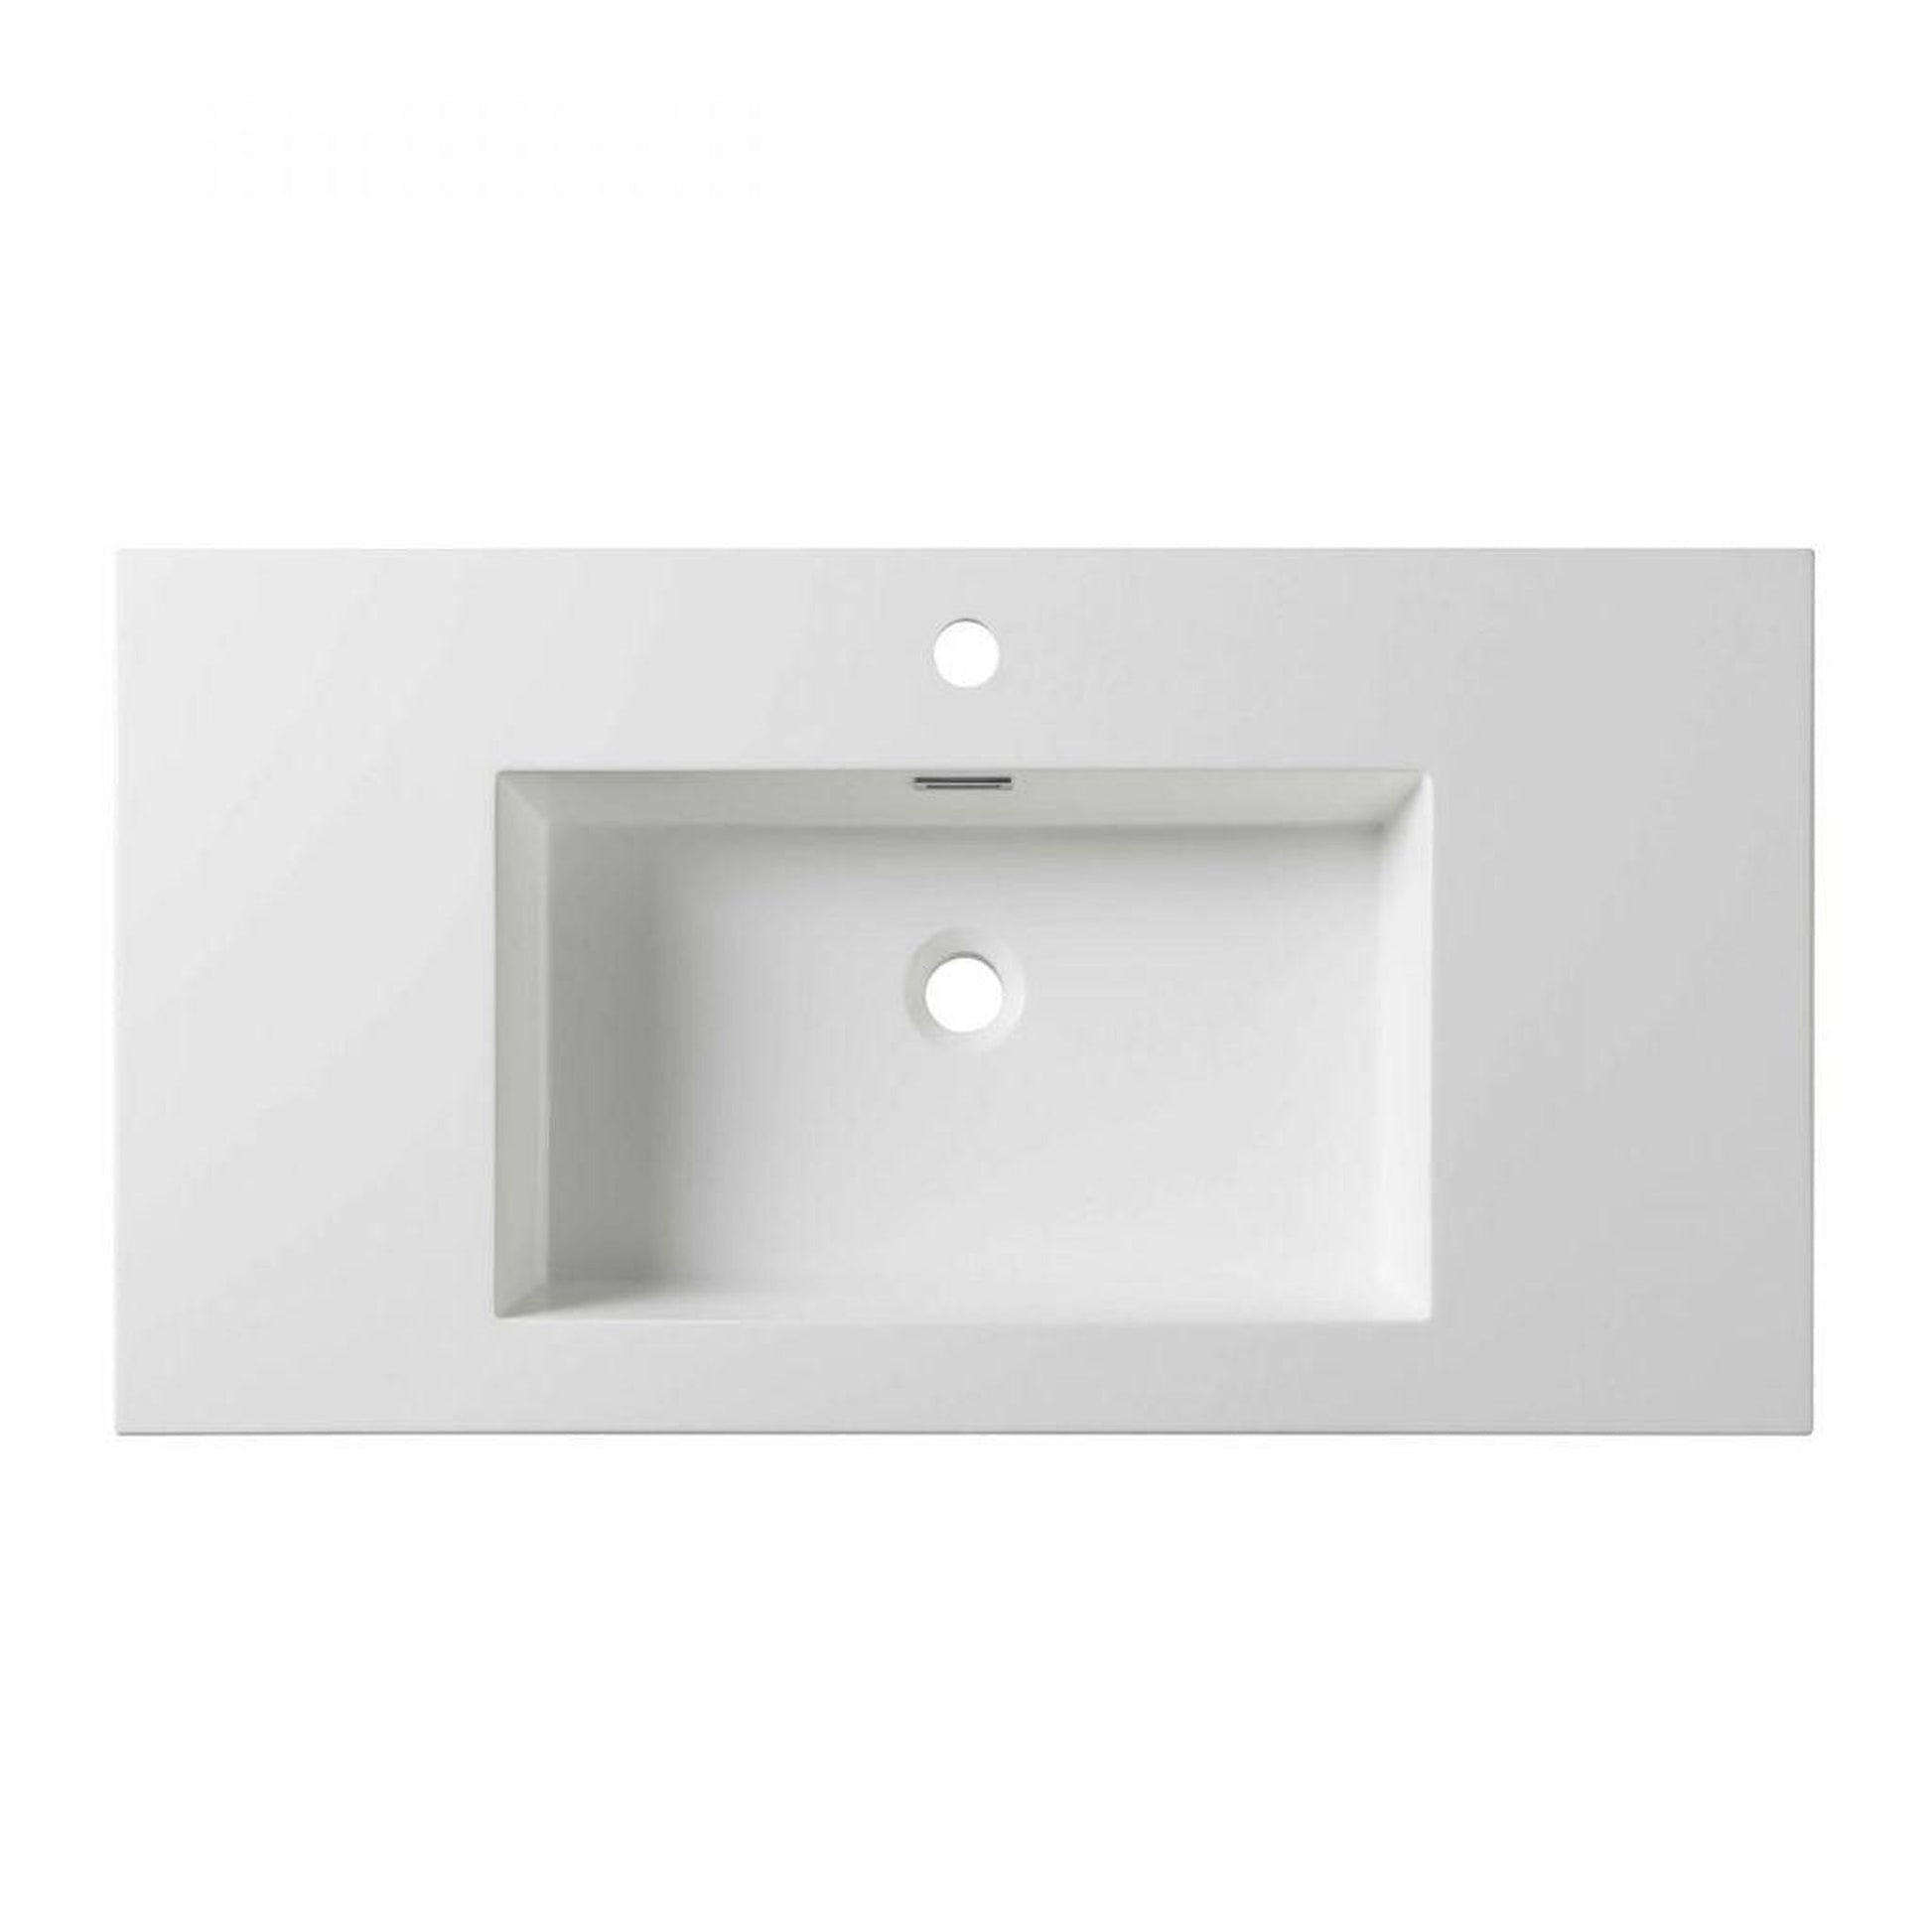 Blossom 36" x 18" White Rectangular Acrylic Vanity Top With Integrated Single Sink And Overflow